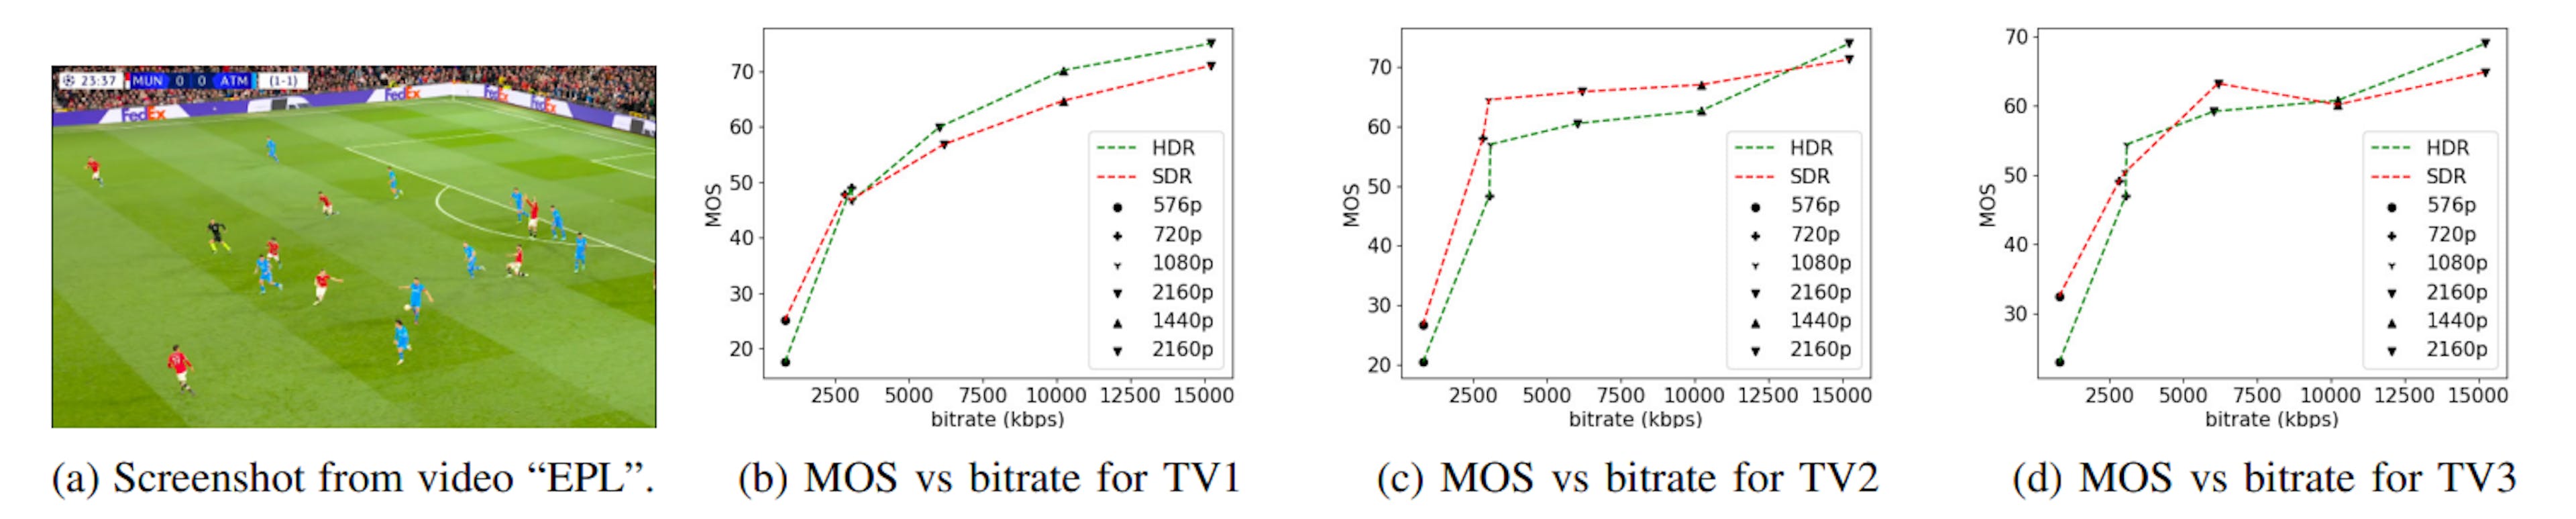 Fig. 3: MOS vs bitrate plots for the three tested televisions on the “EPL” video.